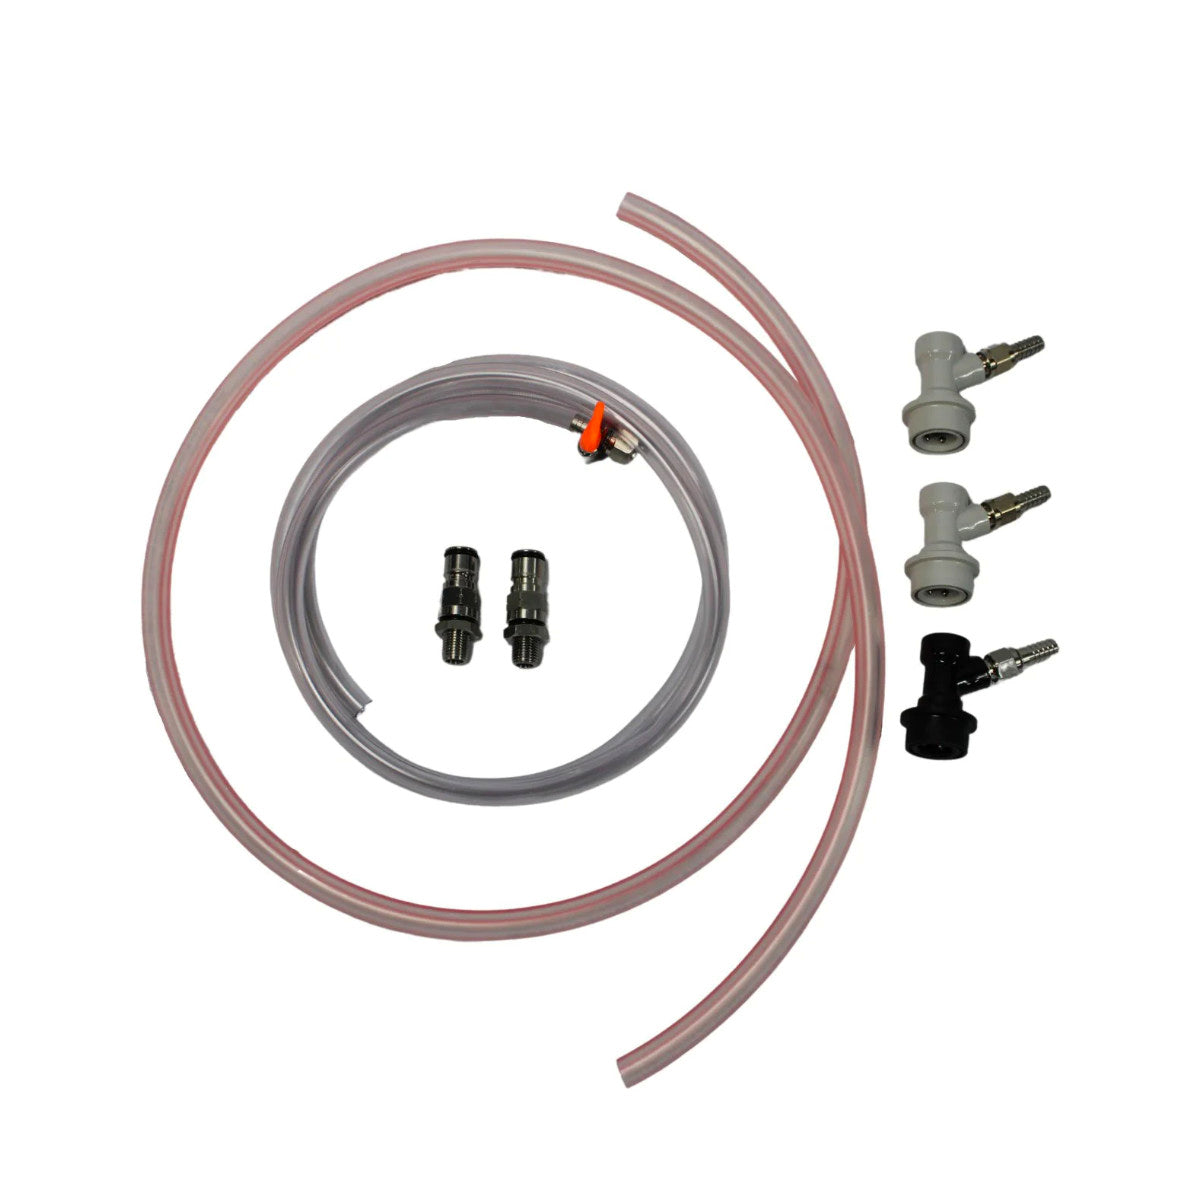 Home brewing closed pressure transfer kit